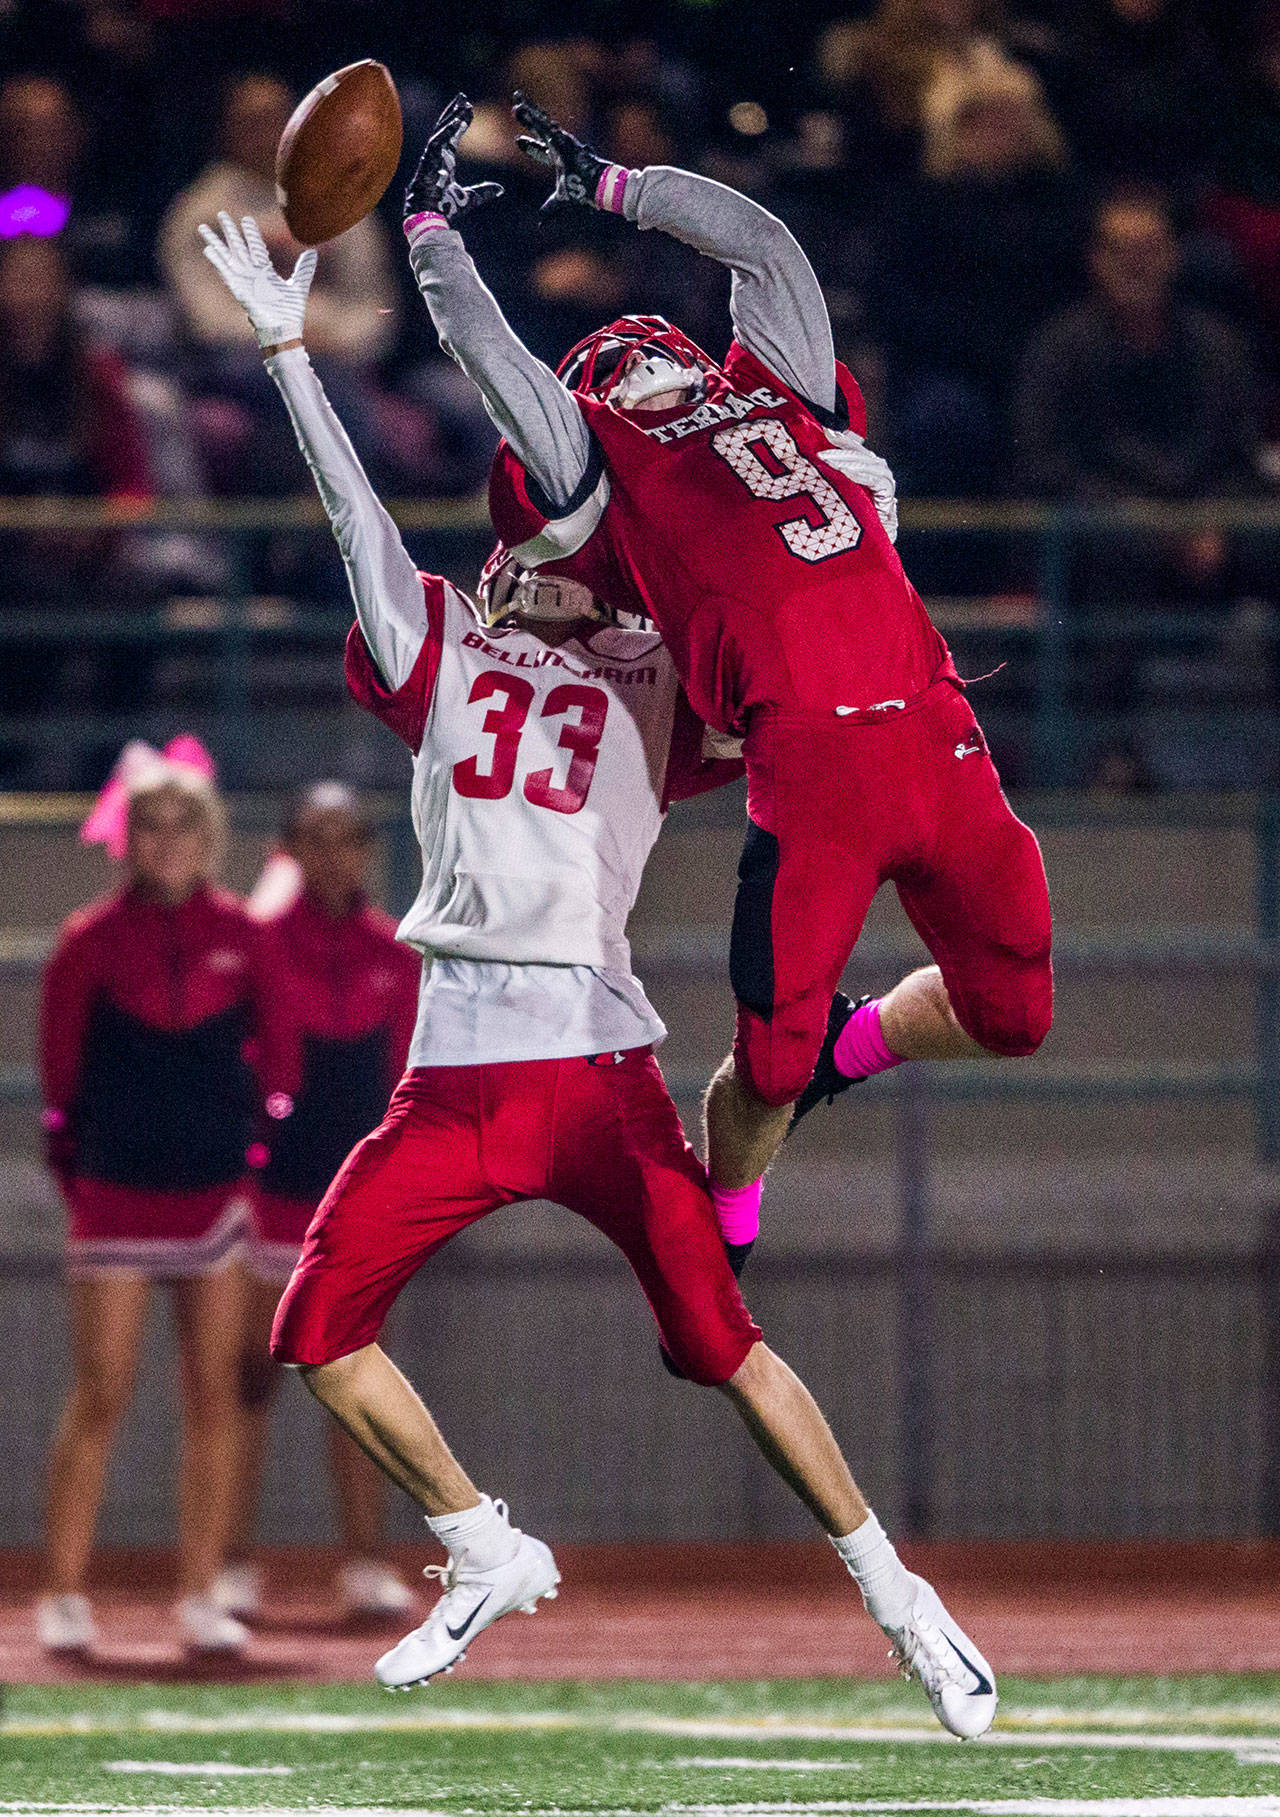 Mountlake Terrace’s Brandon Bach jumps above Bellingham’s Trey Clayton for a pass during a game on Oct. 12 in Edmonds. (Olivia Vanni / The Herald)